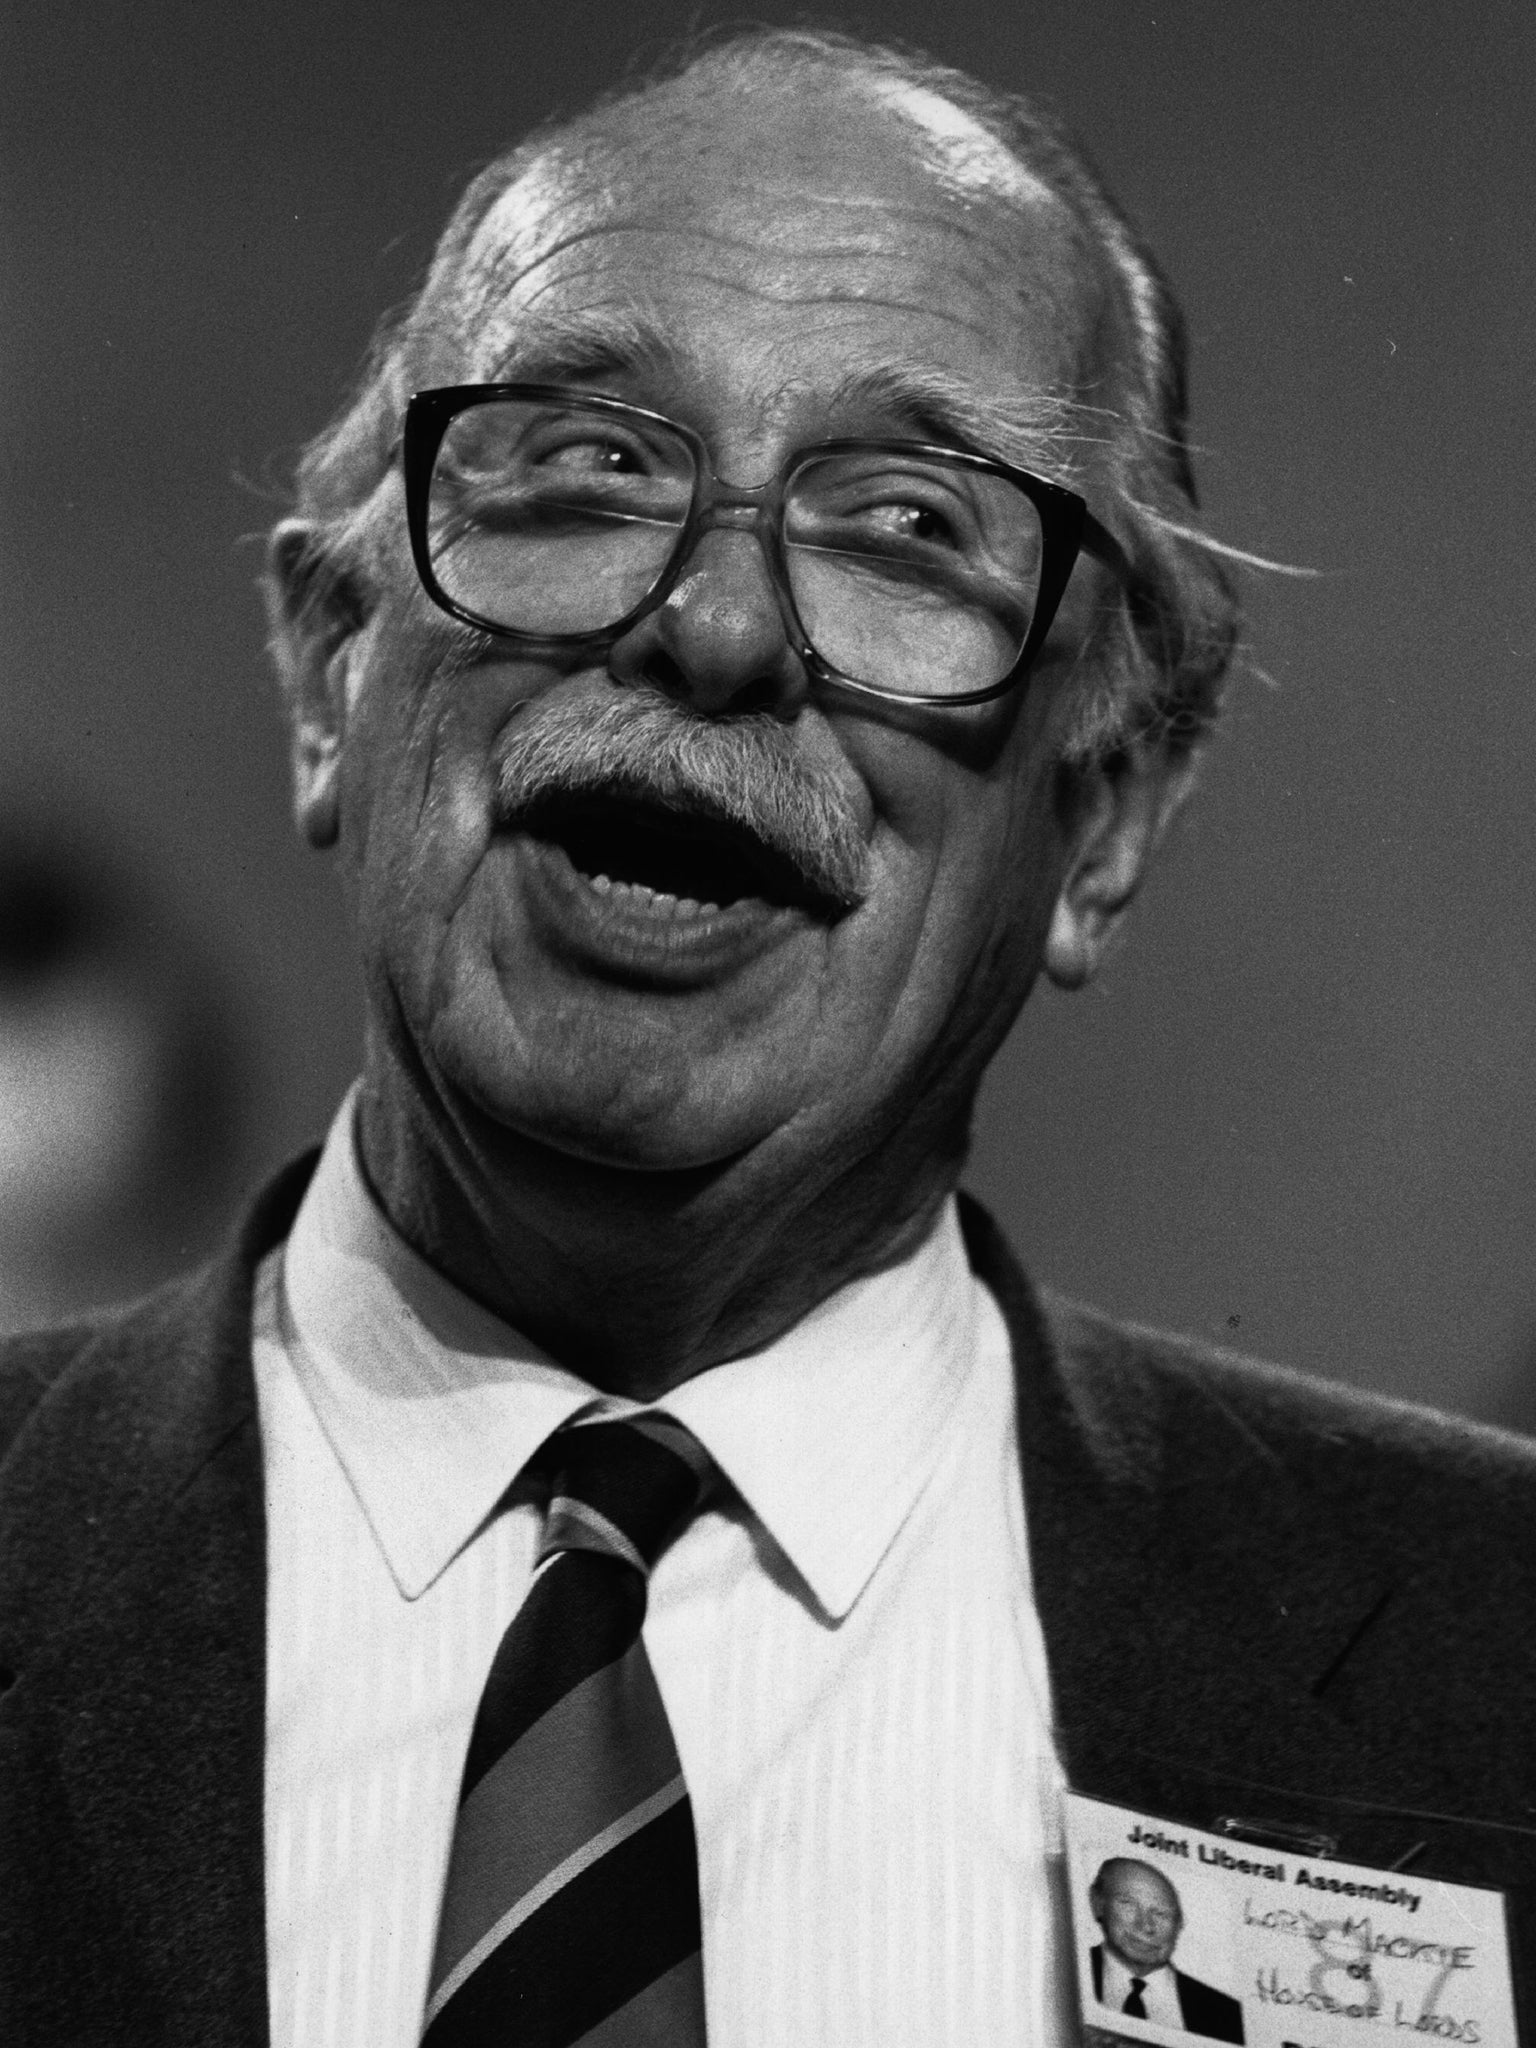 Highly popular: Mackie at the Liberal Party Conference in 1987